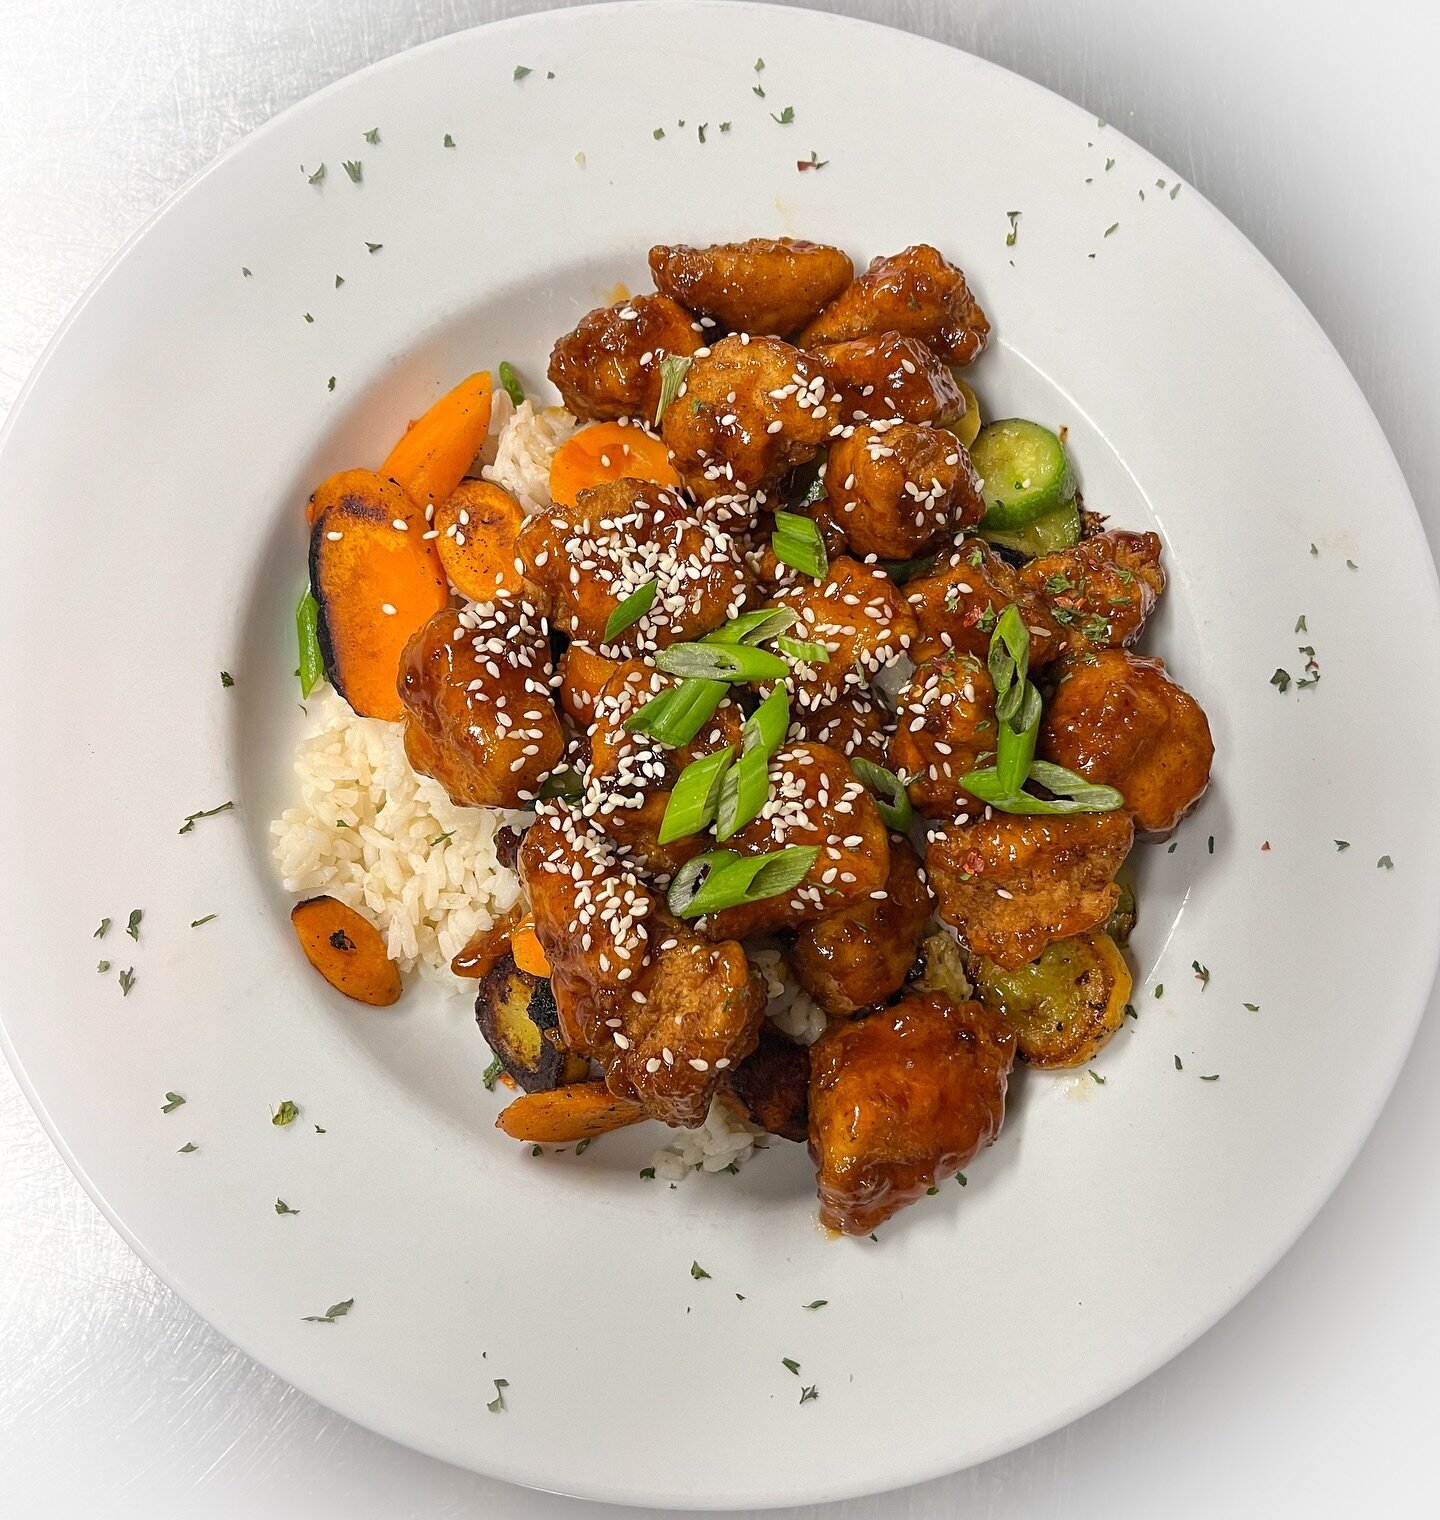 .
Already thinking about lunch ???
✨ We have General Tso Chicken Bowls all week!
&bull;&bull;&bull;fried chicken tossed in a hoisin soy sauce, topped with green onions and sesame seeds, laid on top of a bed of white rice and served with mixed vegetab